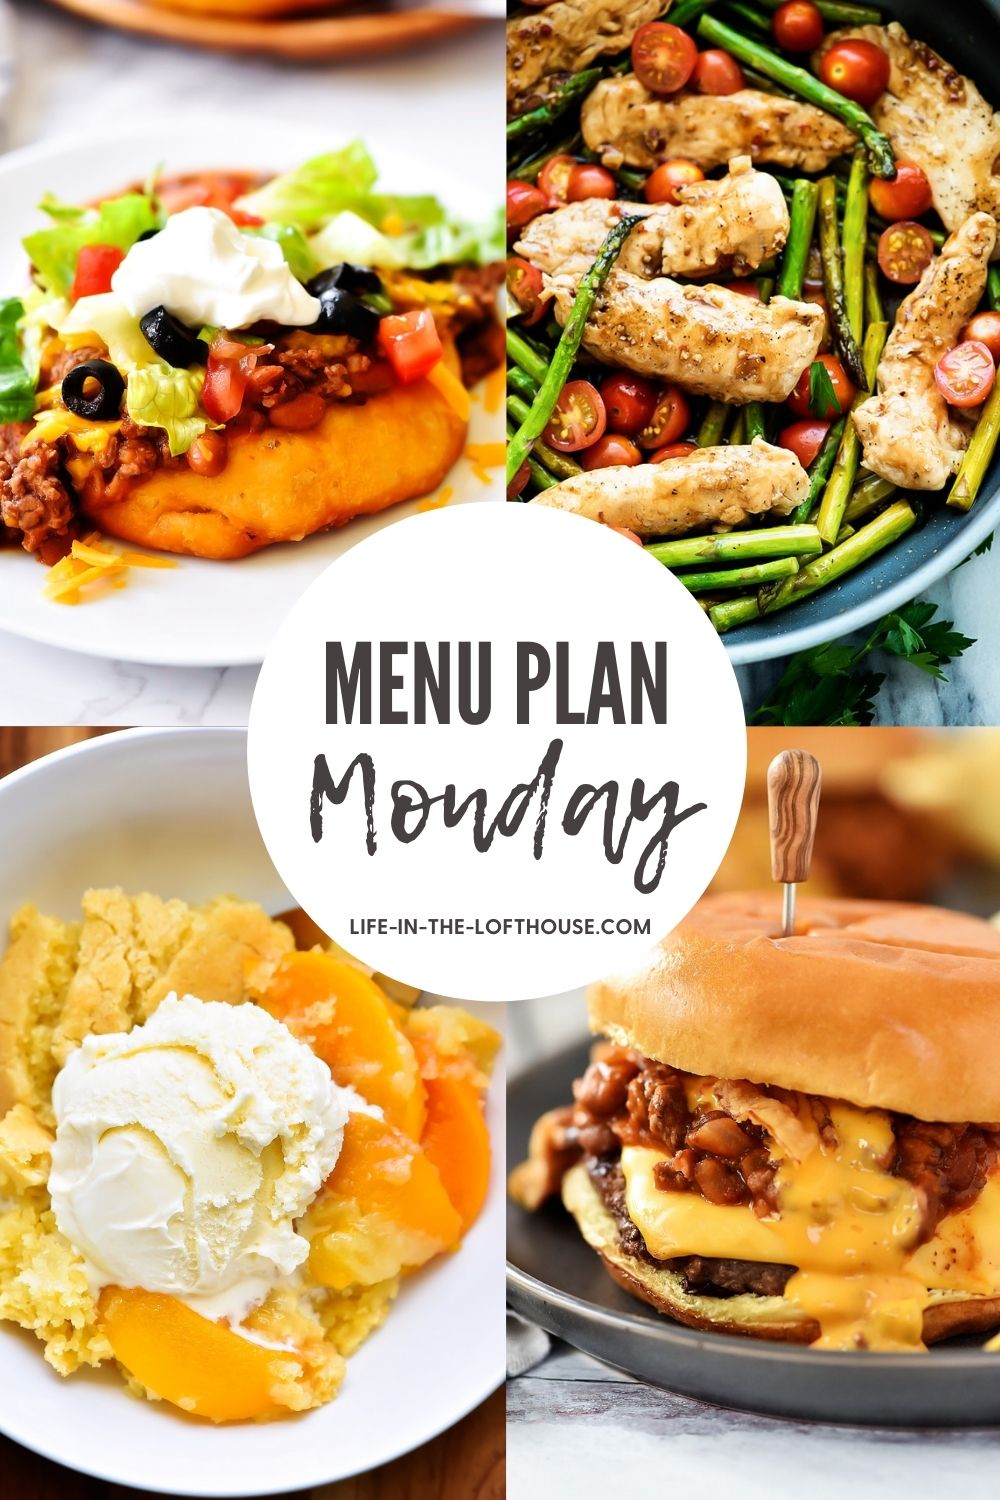 Menu Plan Monday is a dinner menu with six dinner recipes and one dessert.